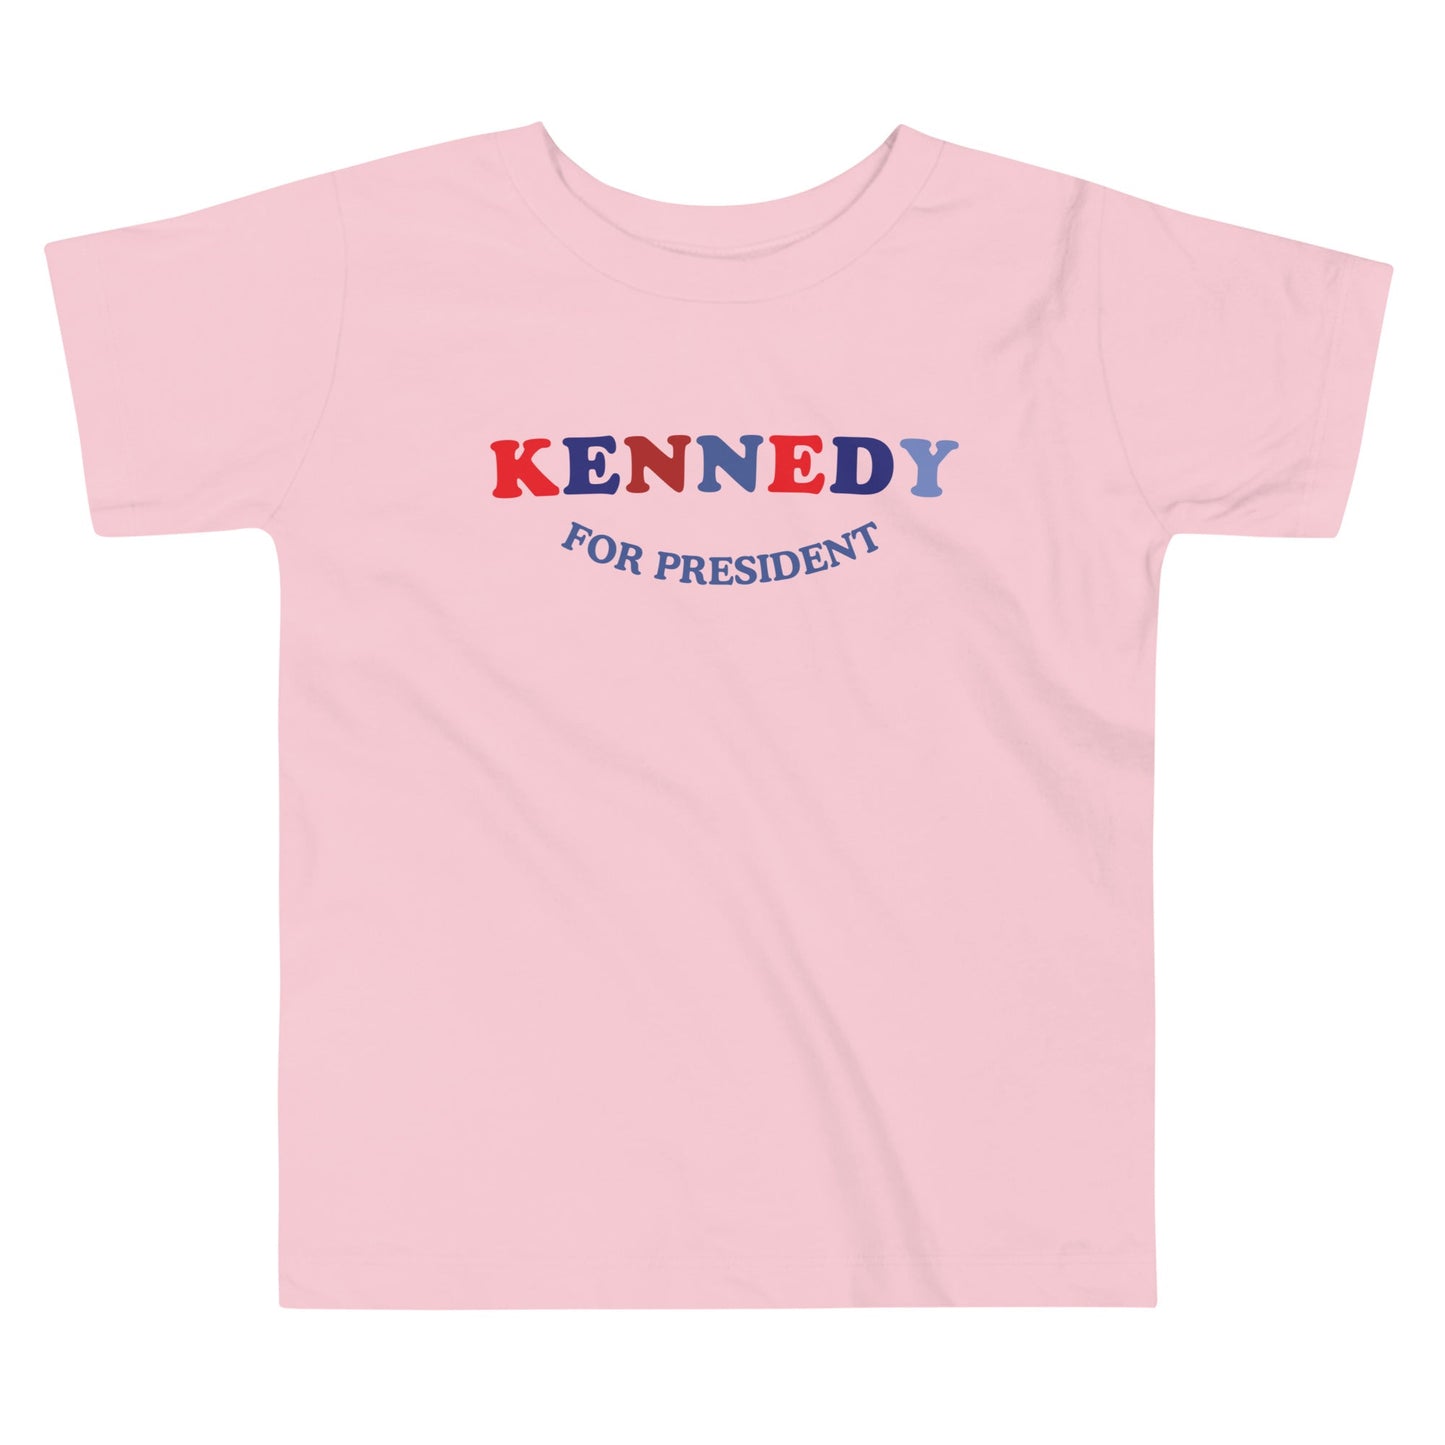 Kennedy for President Toddler Tee - TEAM KENNEDY. All rights reserved